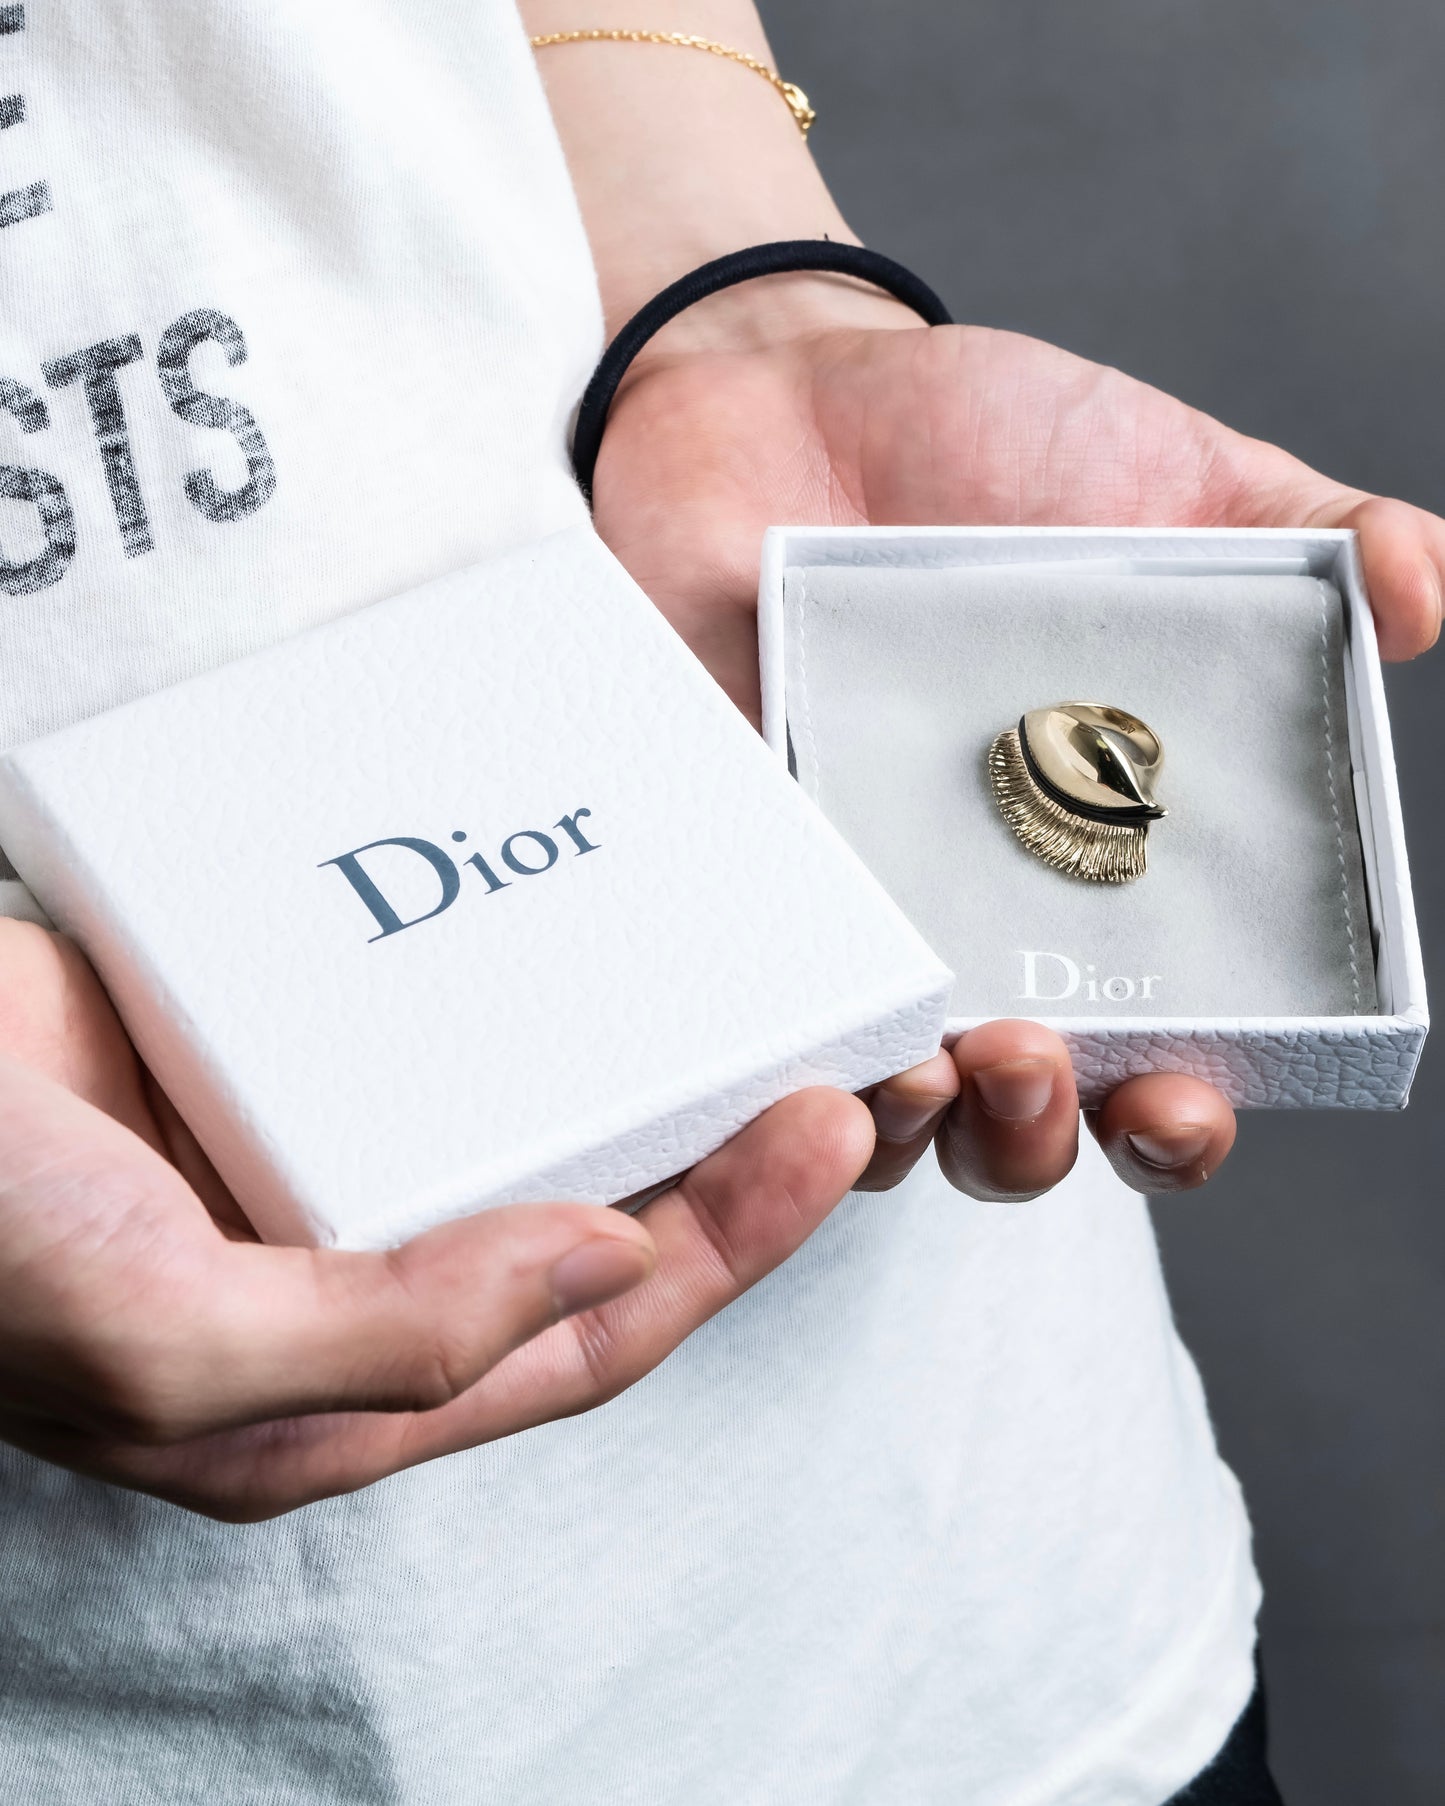 "Dior" Feather motif antique style ring